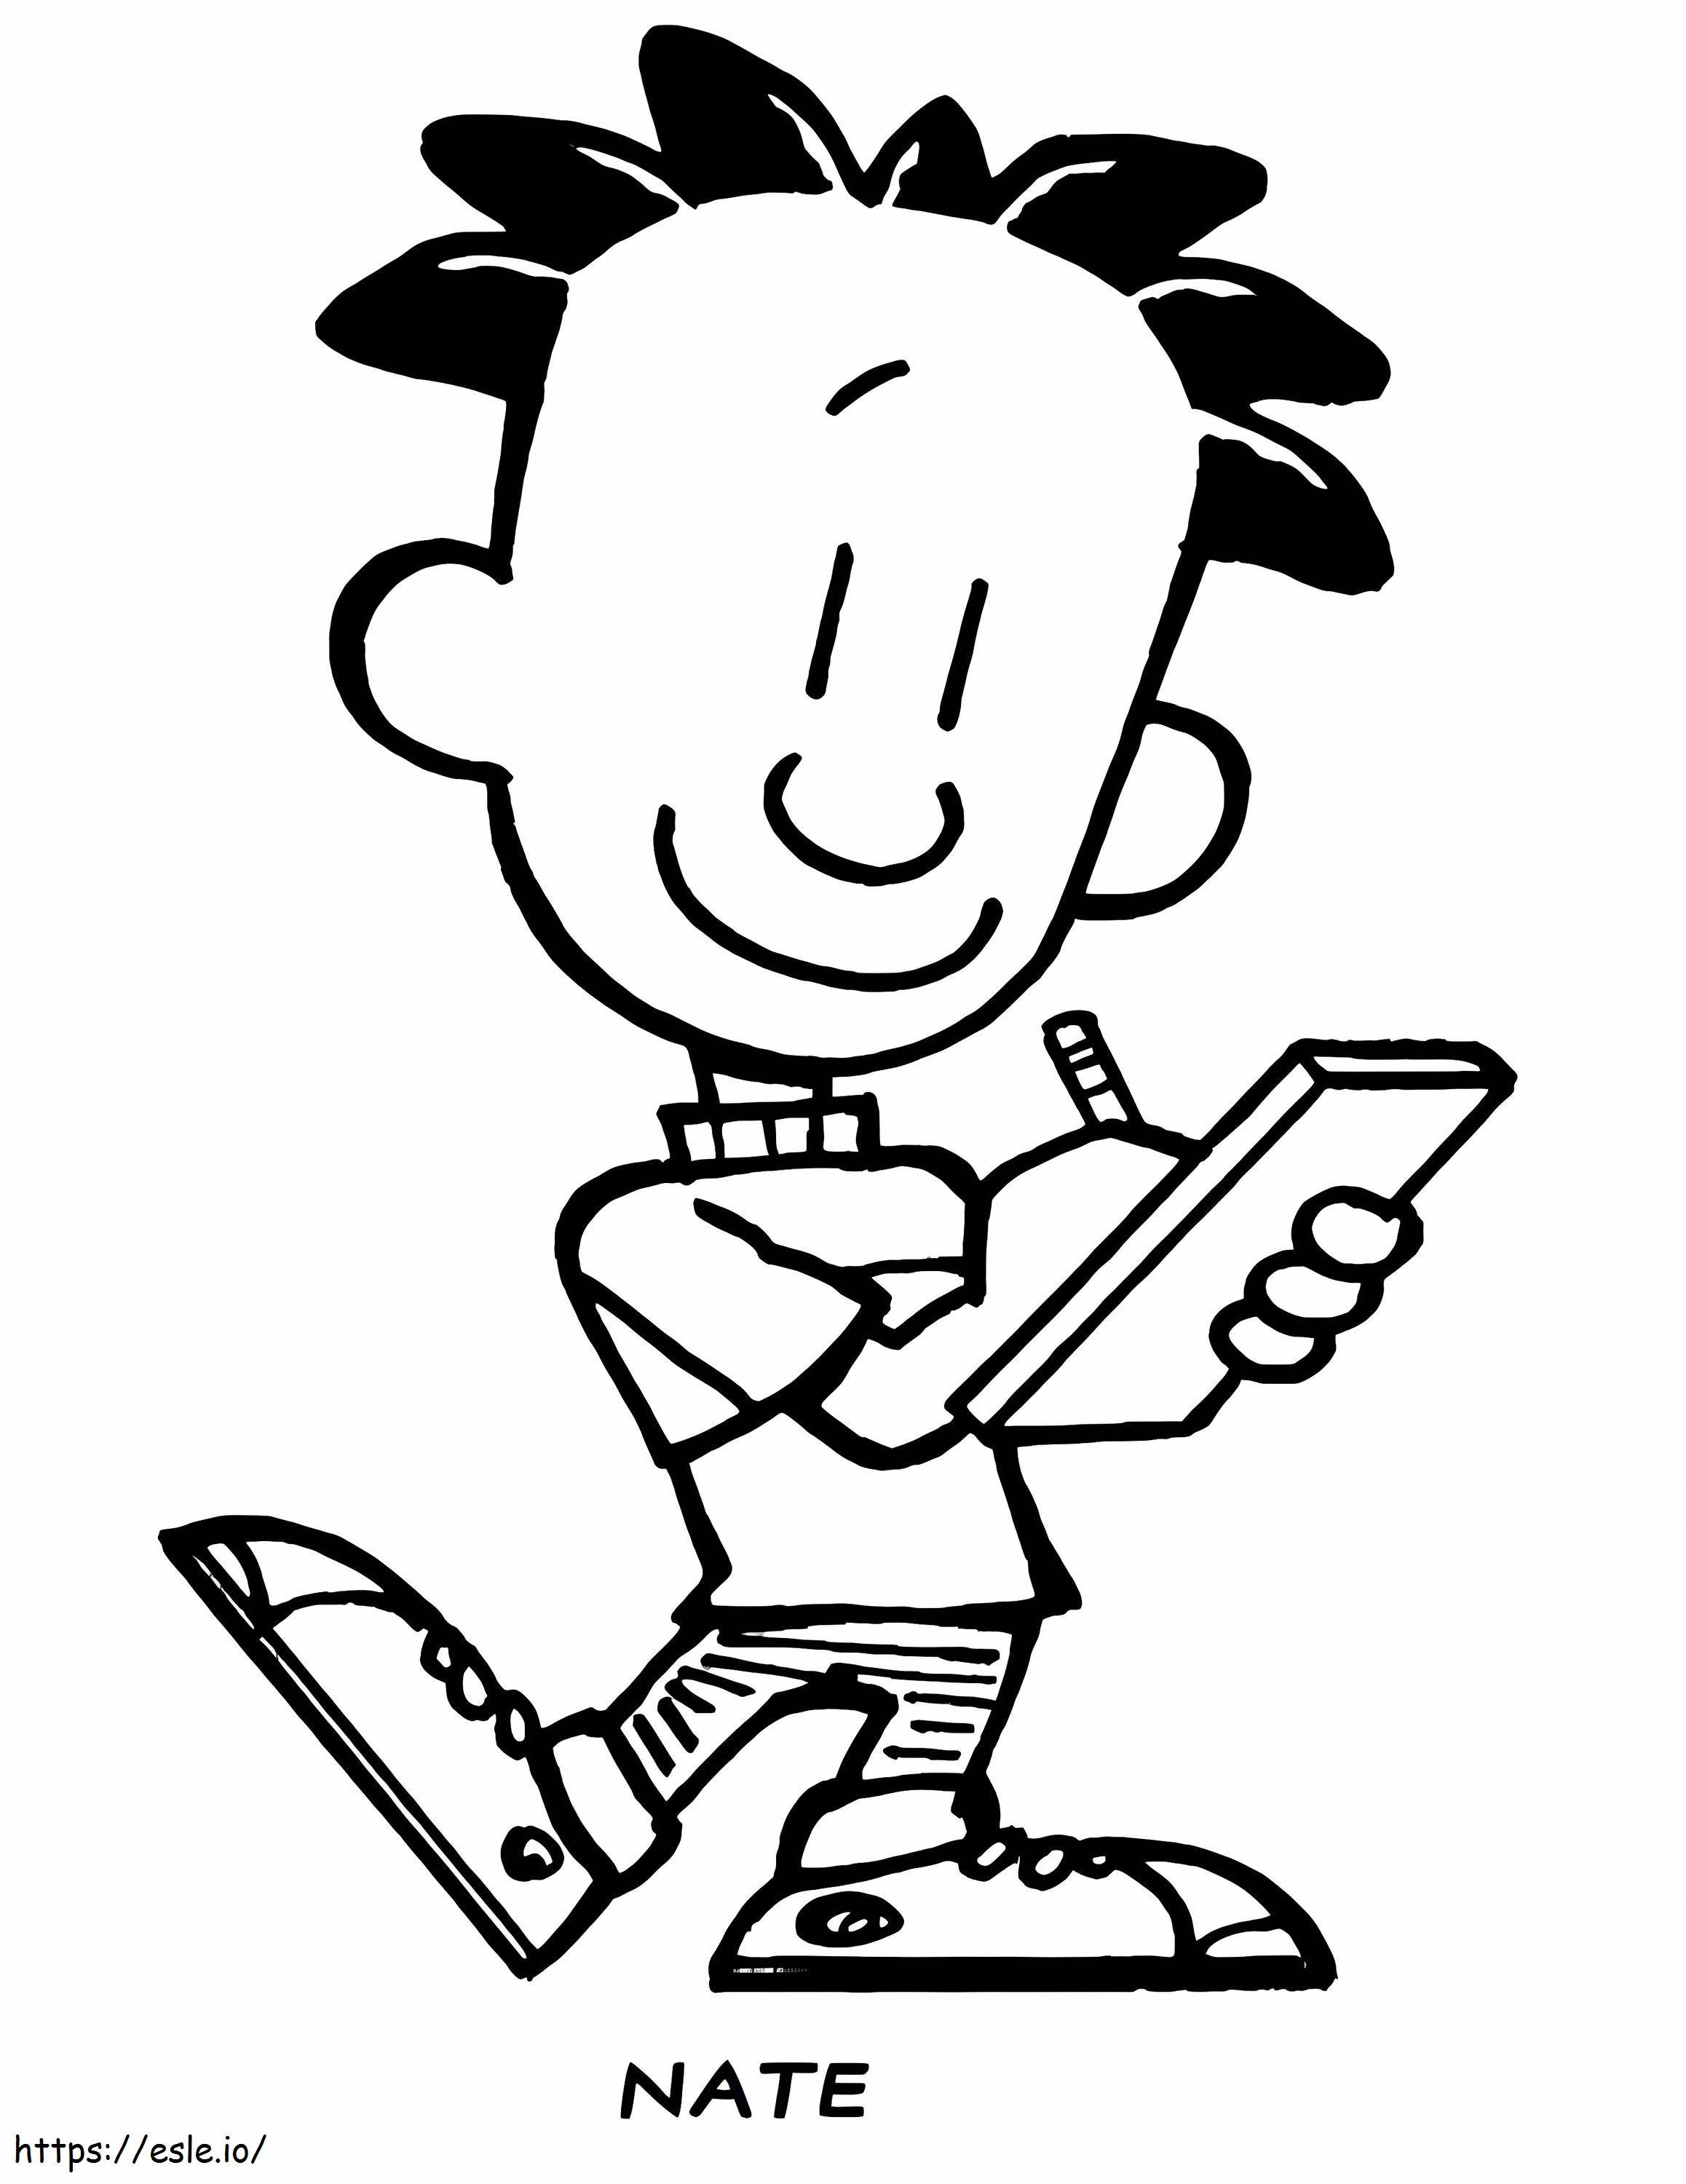 Nate From Big Nate coloring page